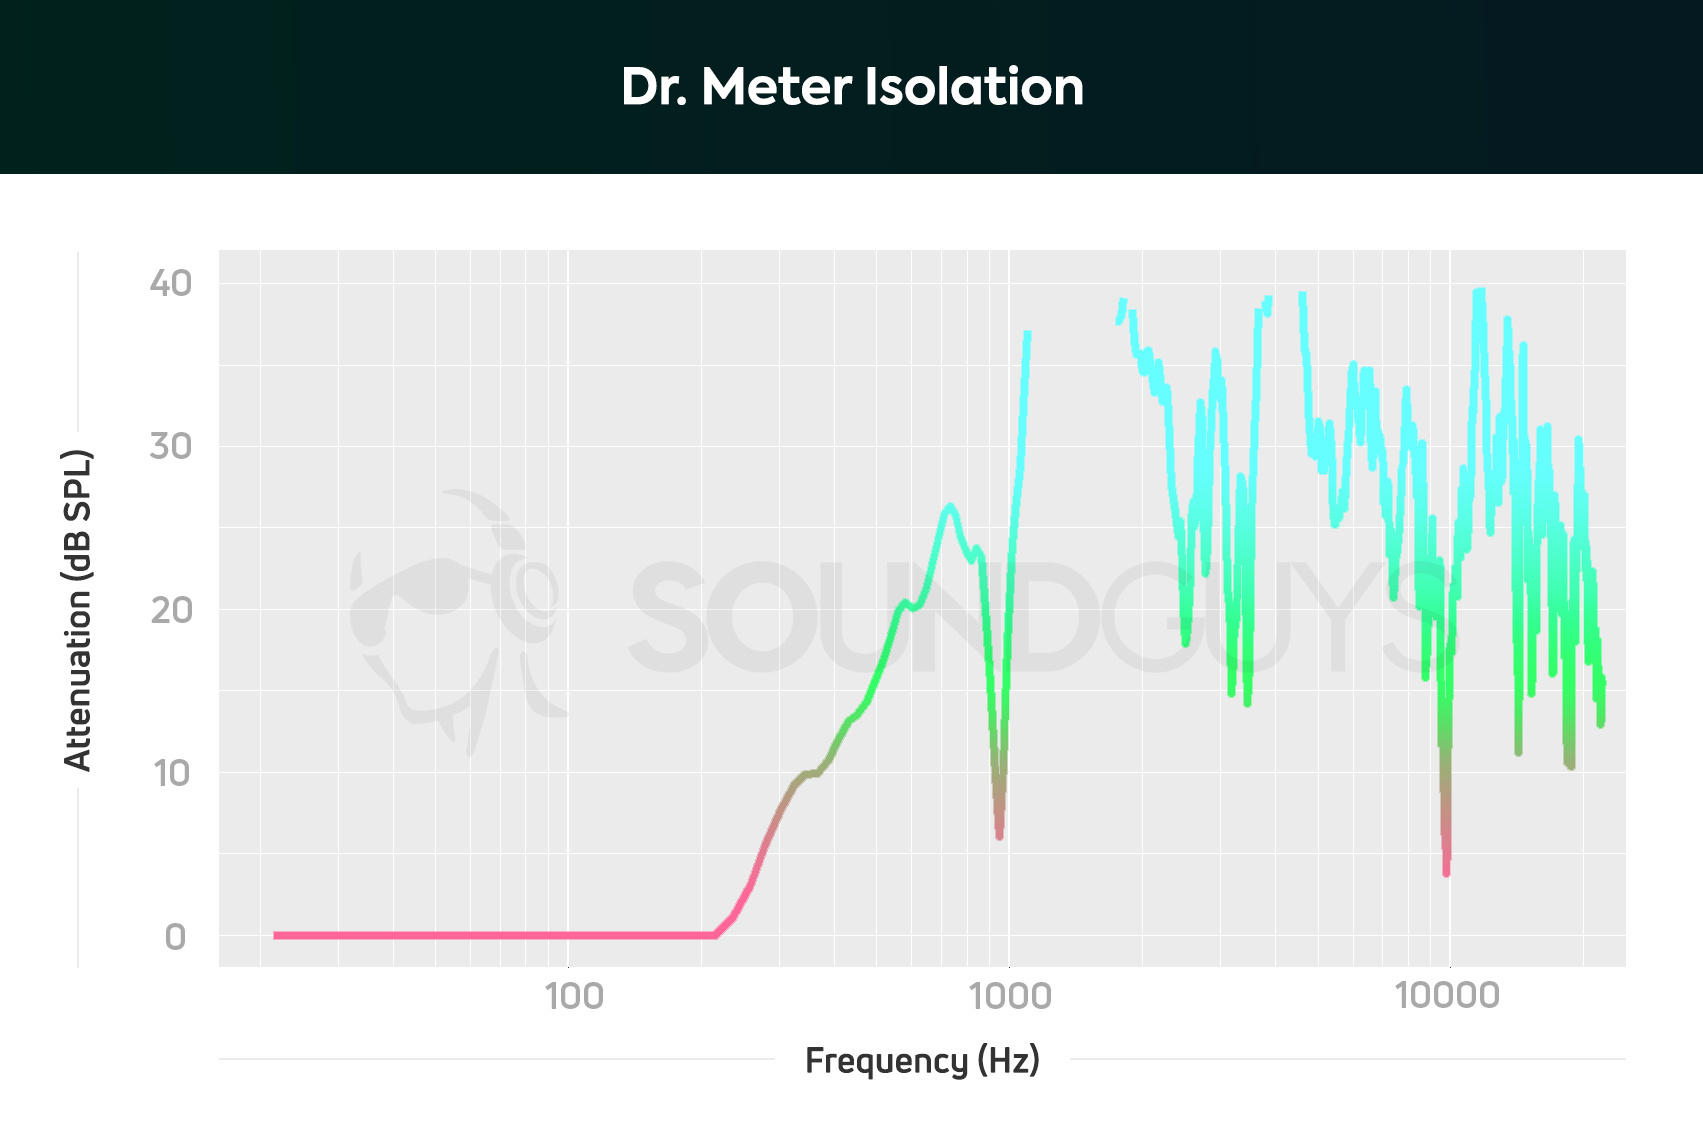 An isolation chart of the Dr. Meter kids hearing protectors.